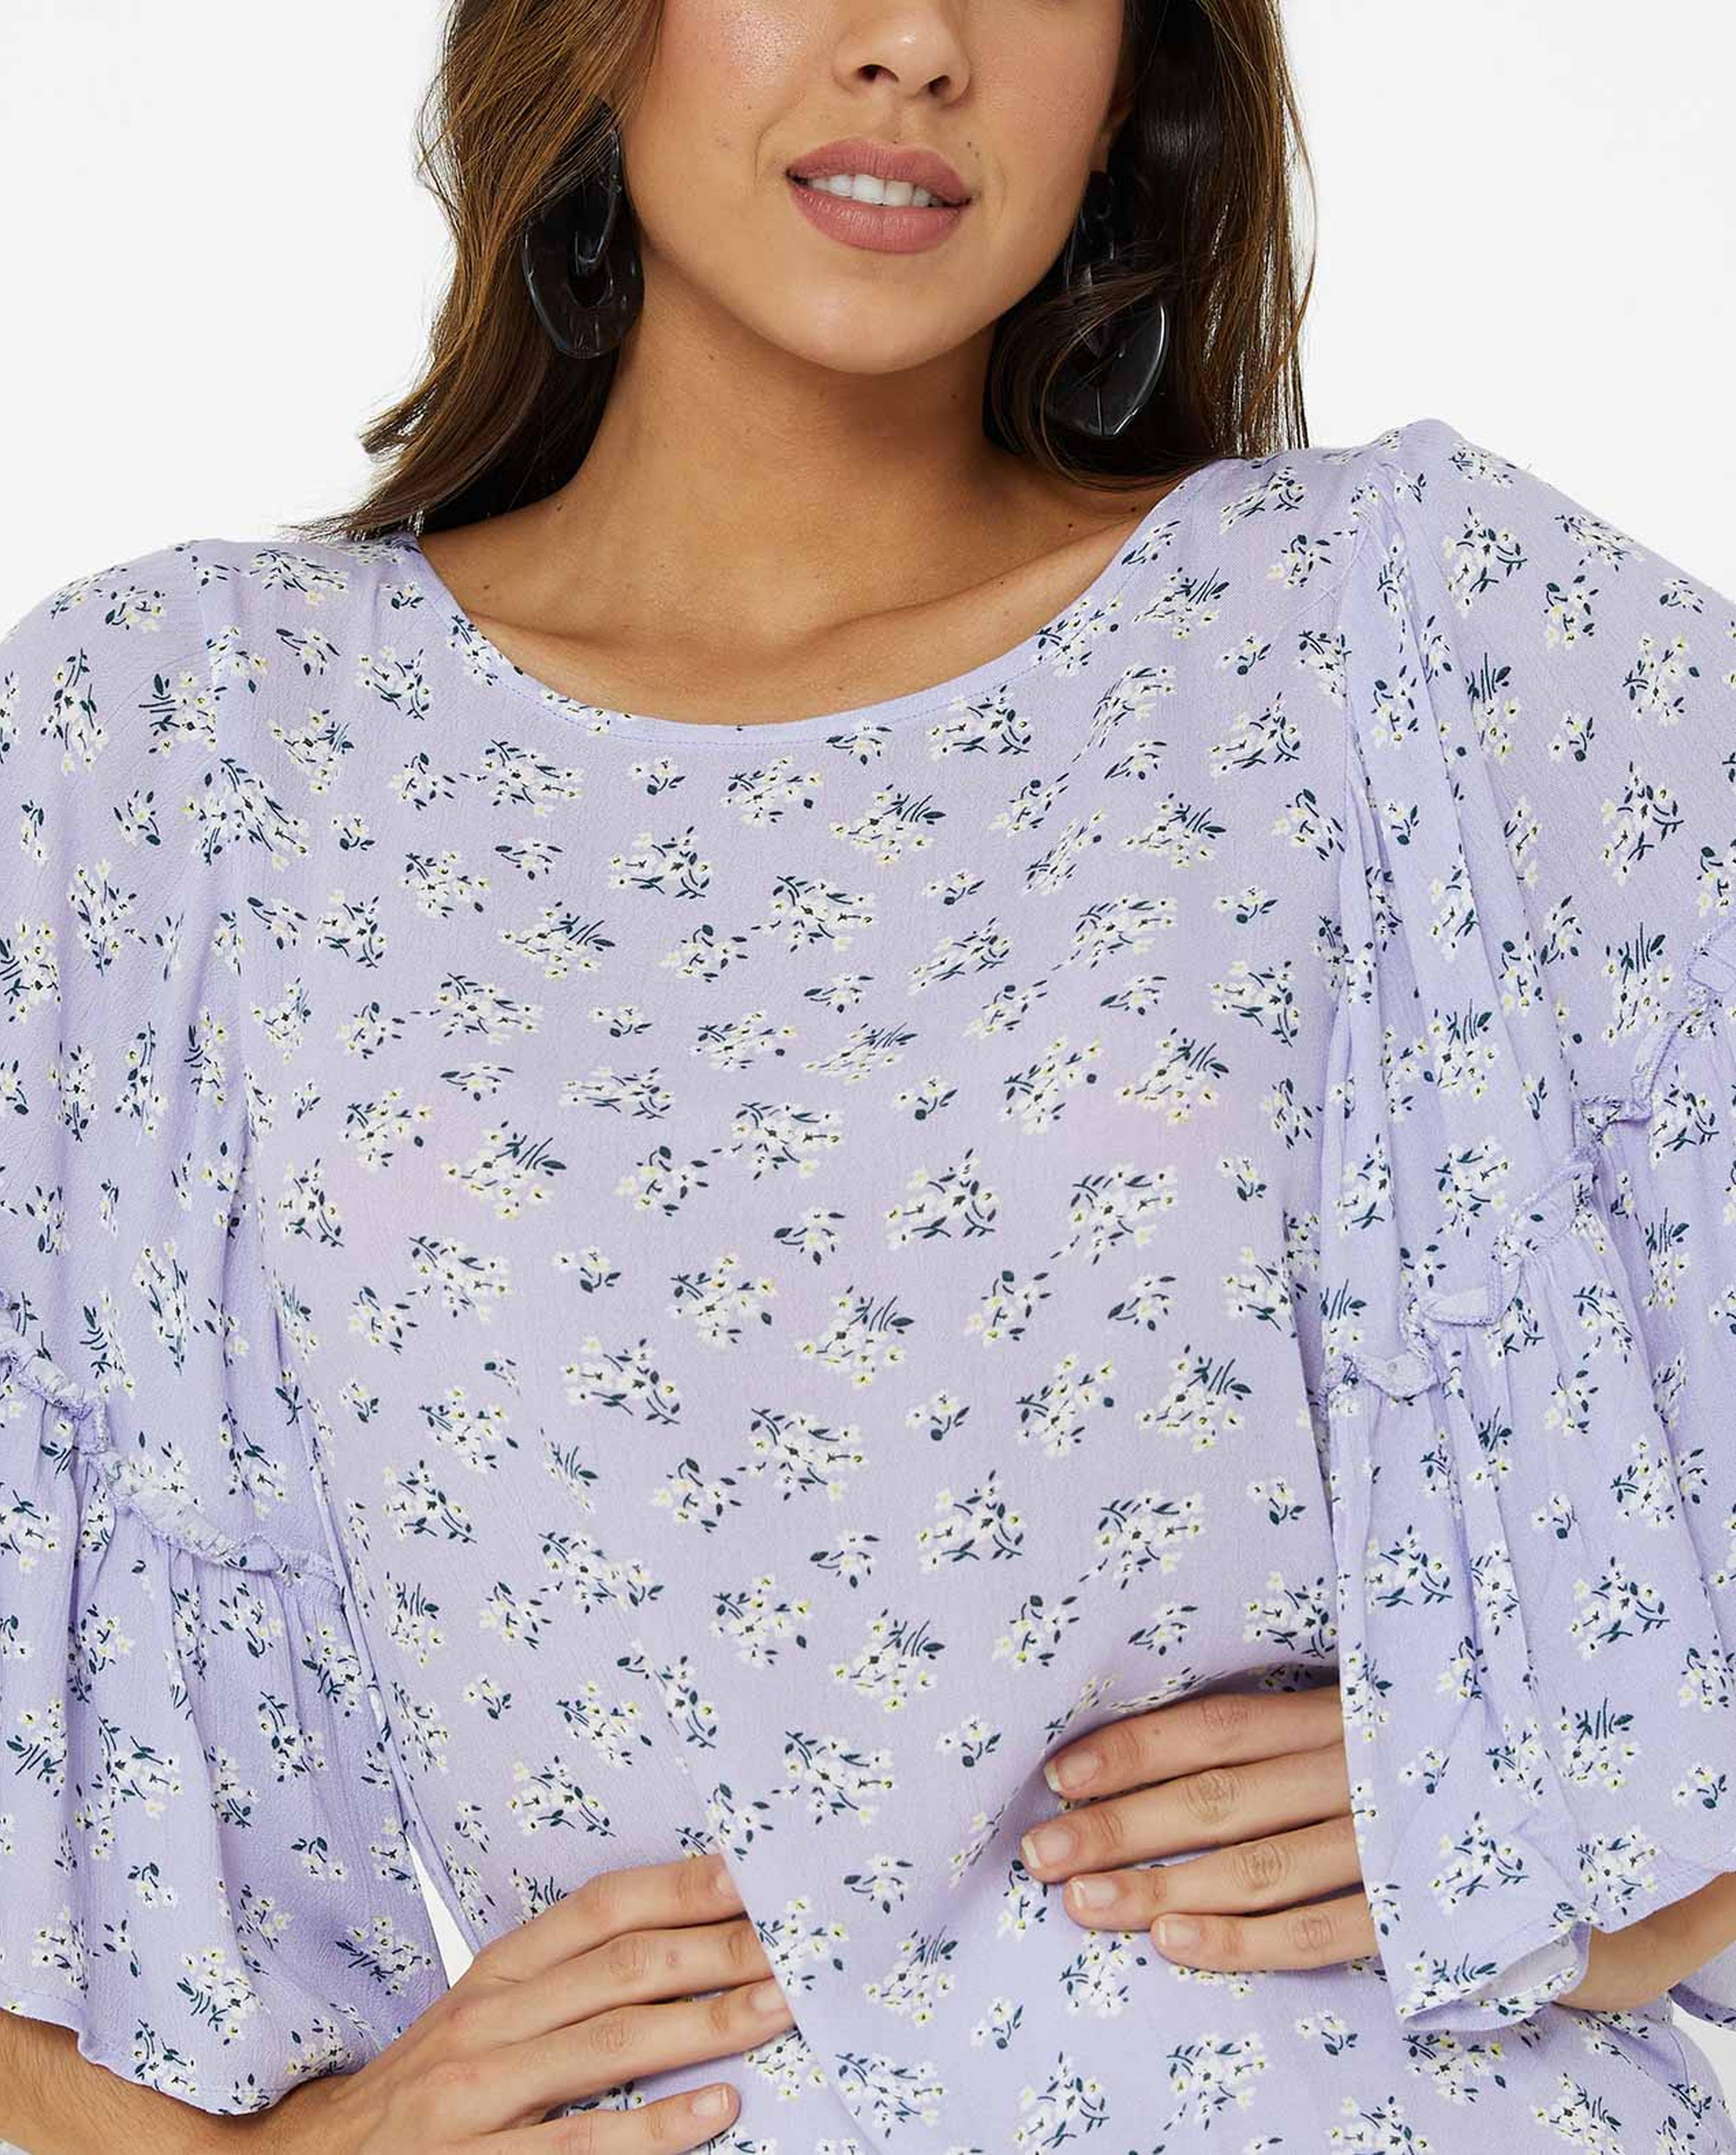 Floral Printed Top with Boat Neck and Flared Sleeves